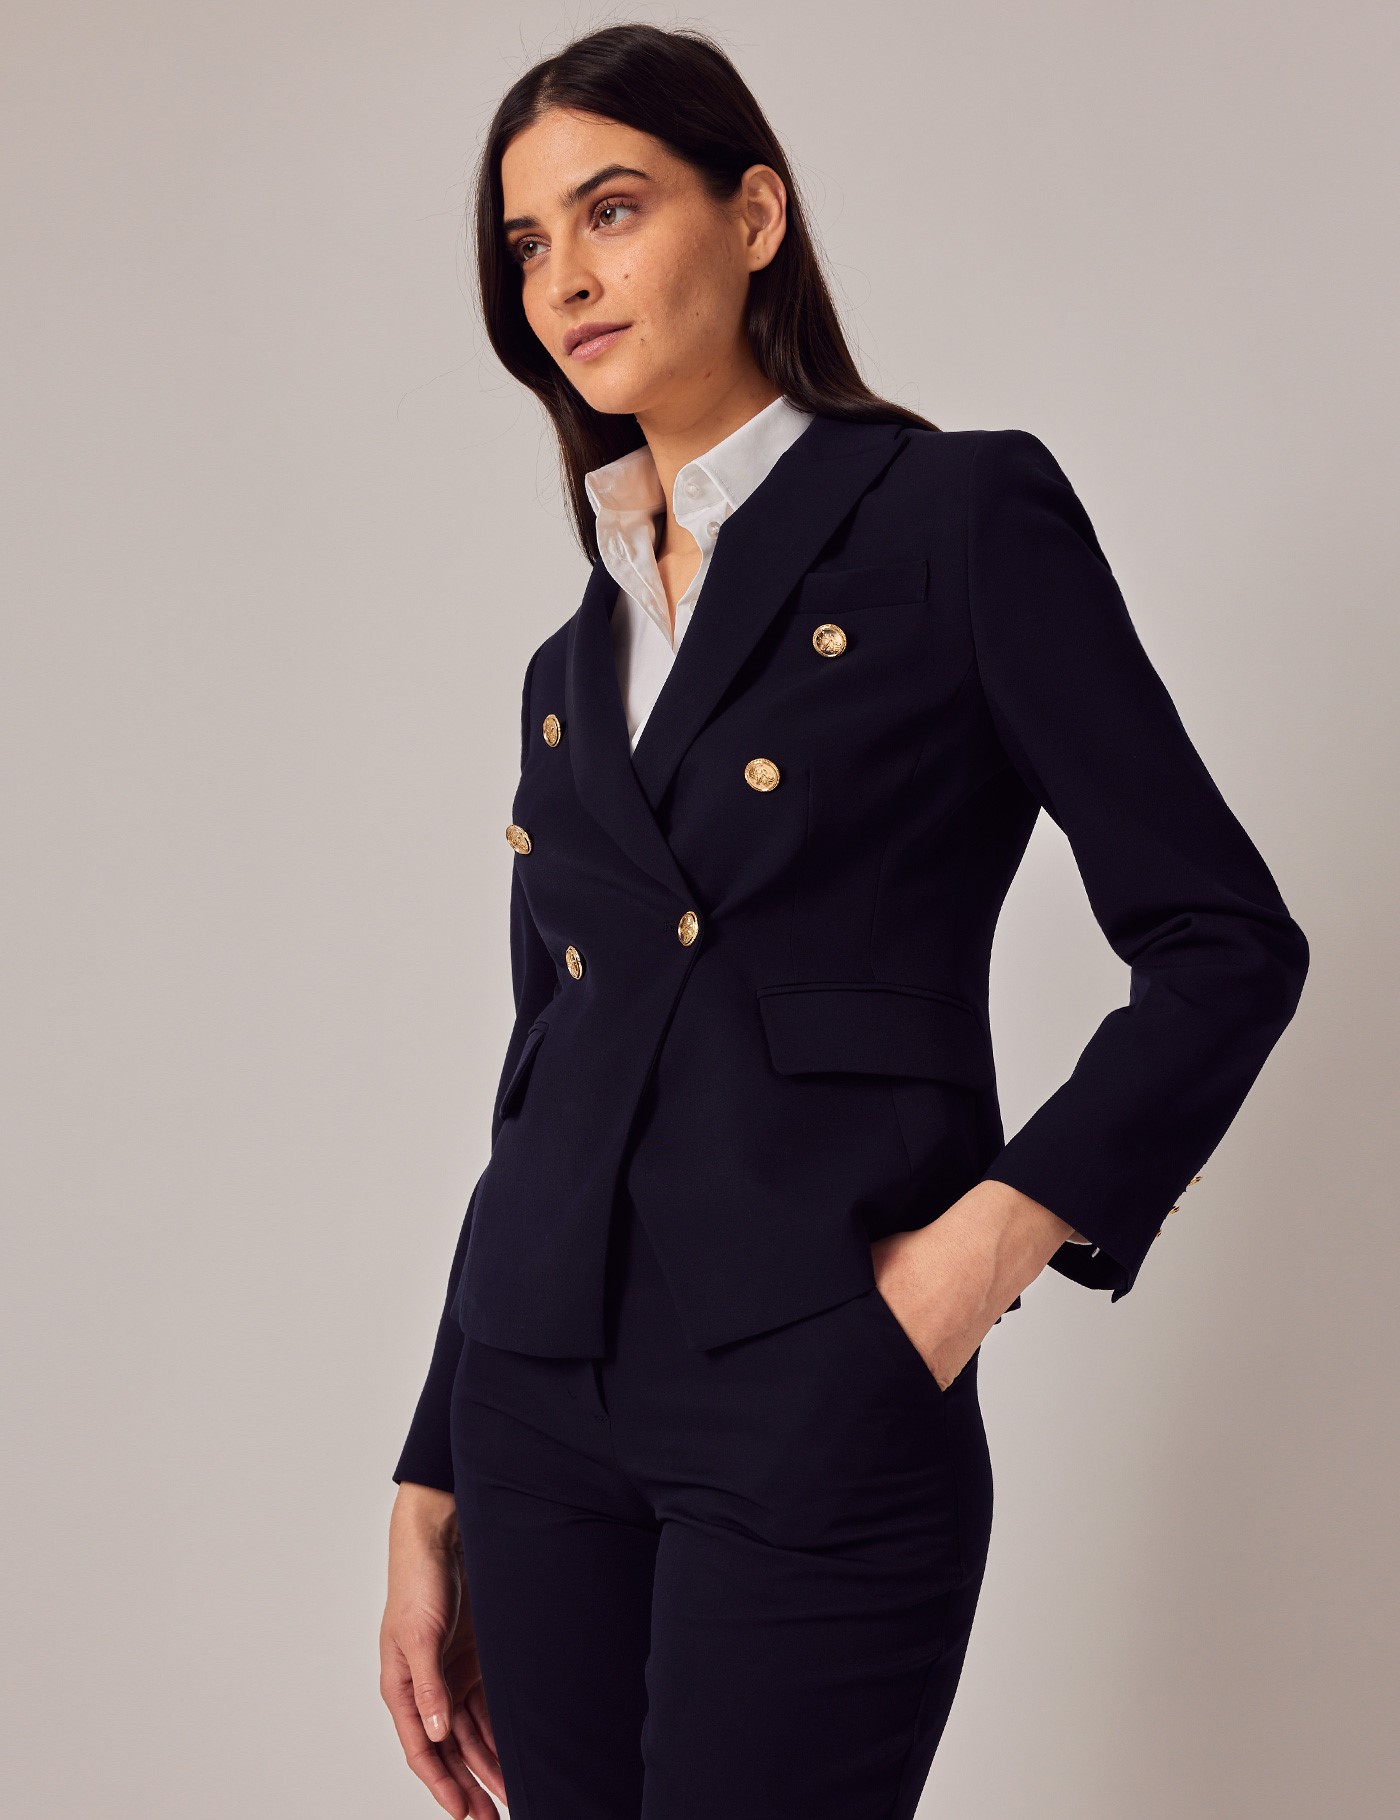 Women’s Double Breasted Suit in Navy | Hawes & Curtis